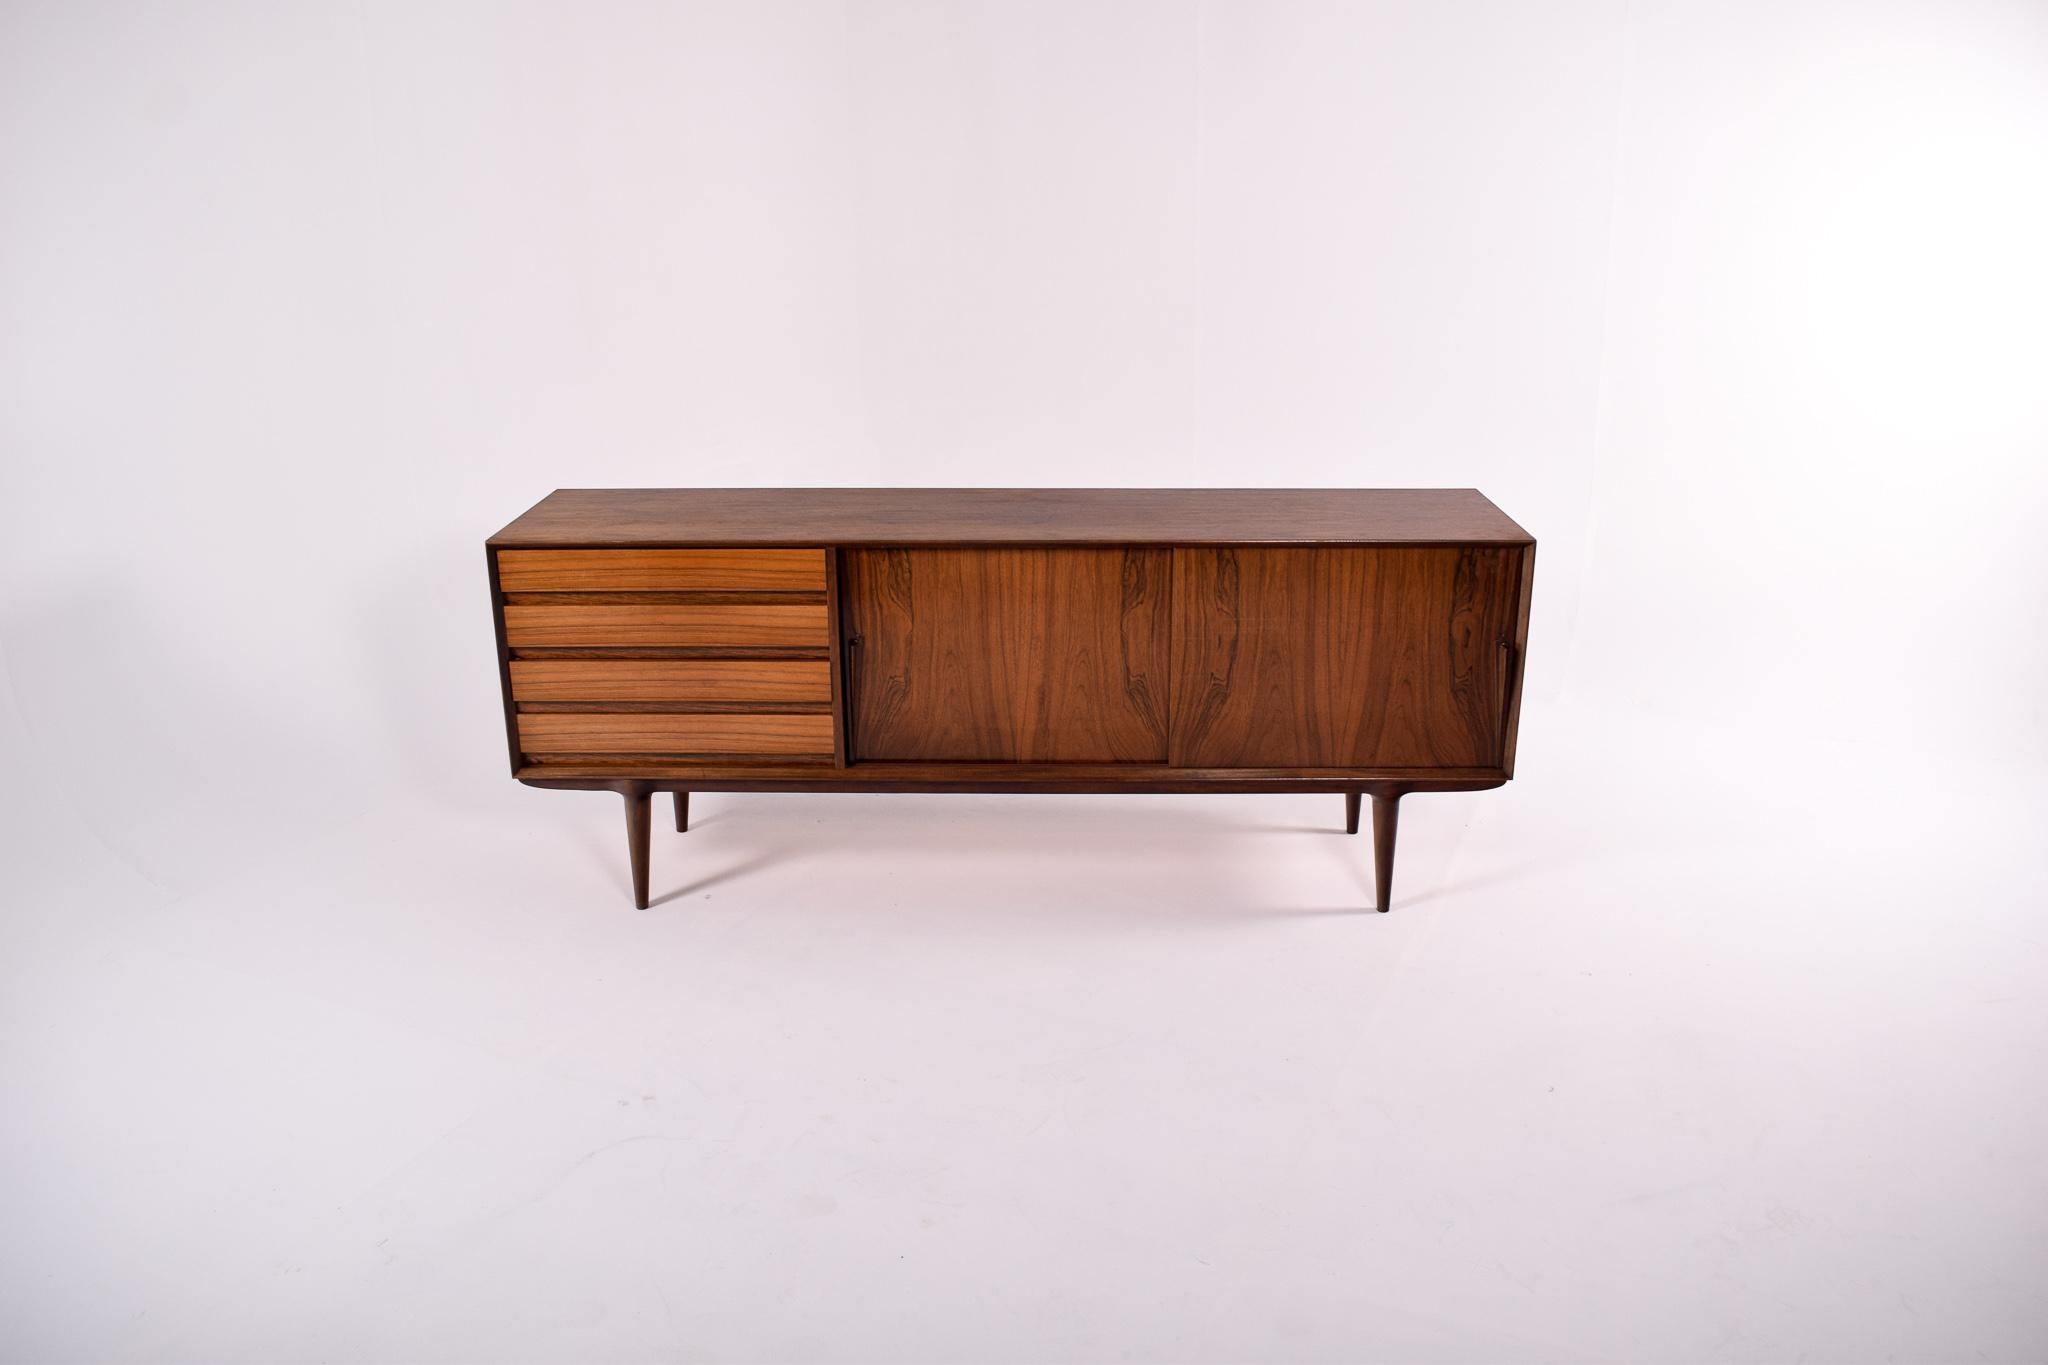 Designed by Gunni Omann in the 1960s, this sideboard conjugates the simplicity of the running doors with the drawers and the attractiveness of a beautiful veneer. The detail of the legs rounding size to receive perfectly the sideboard is also very